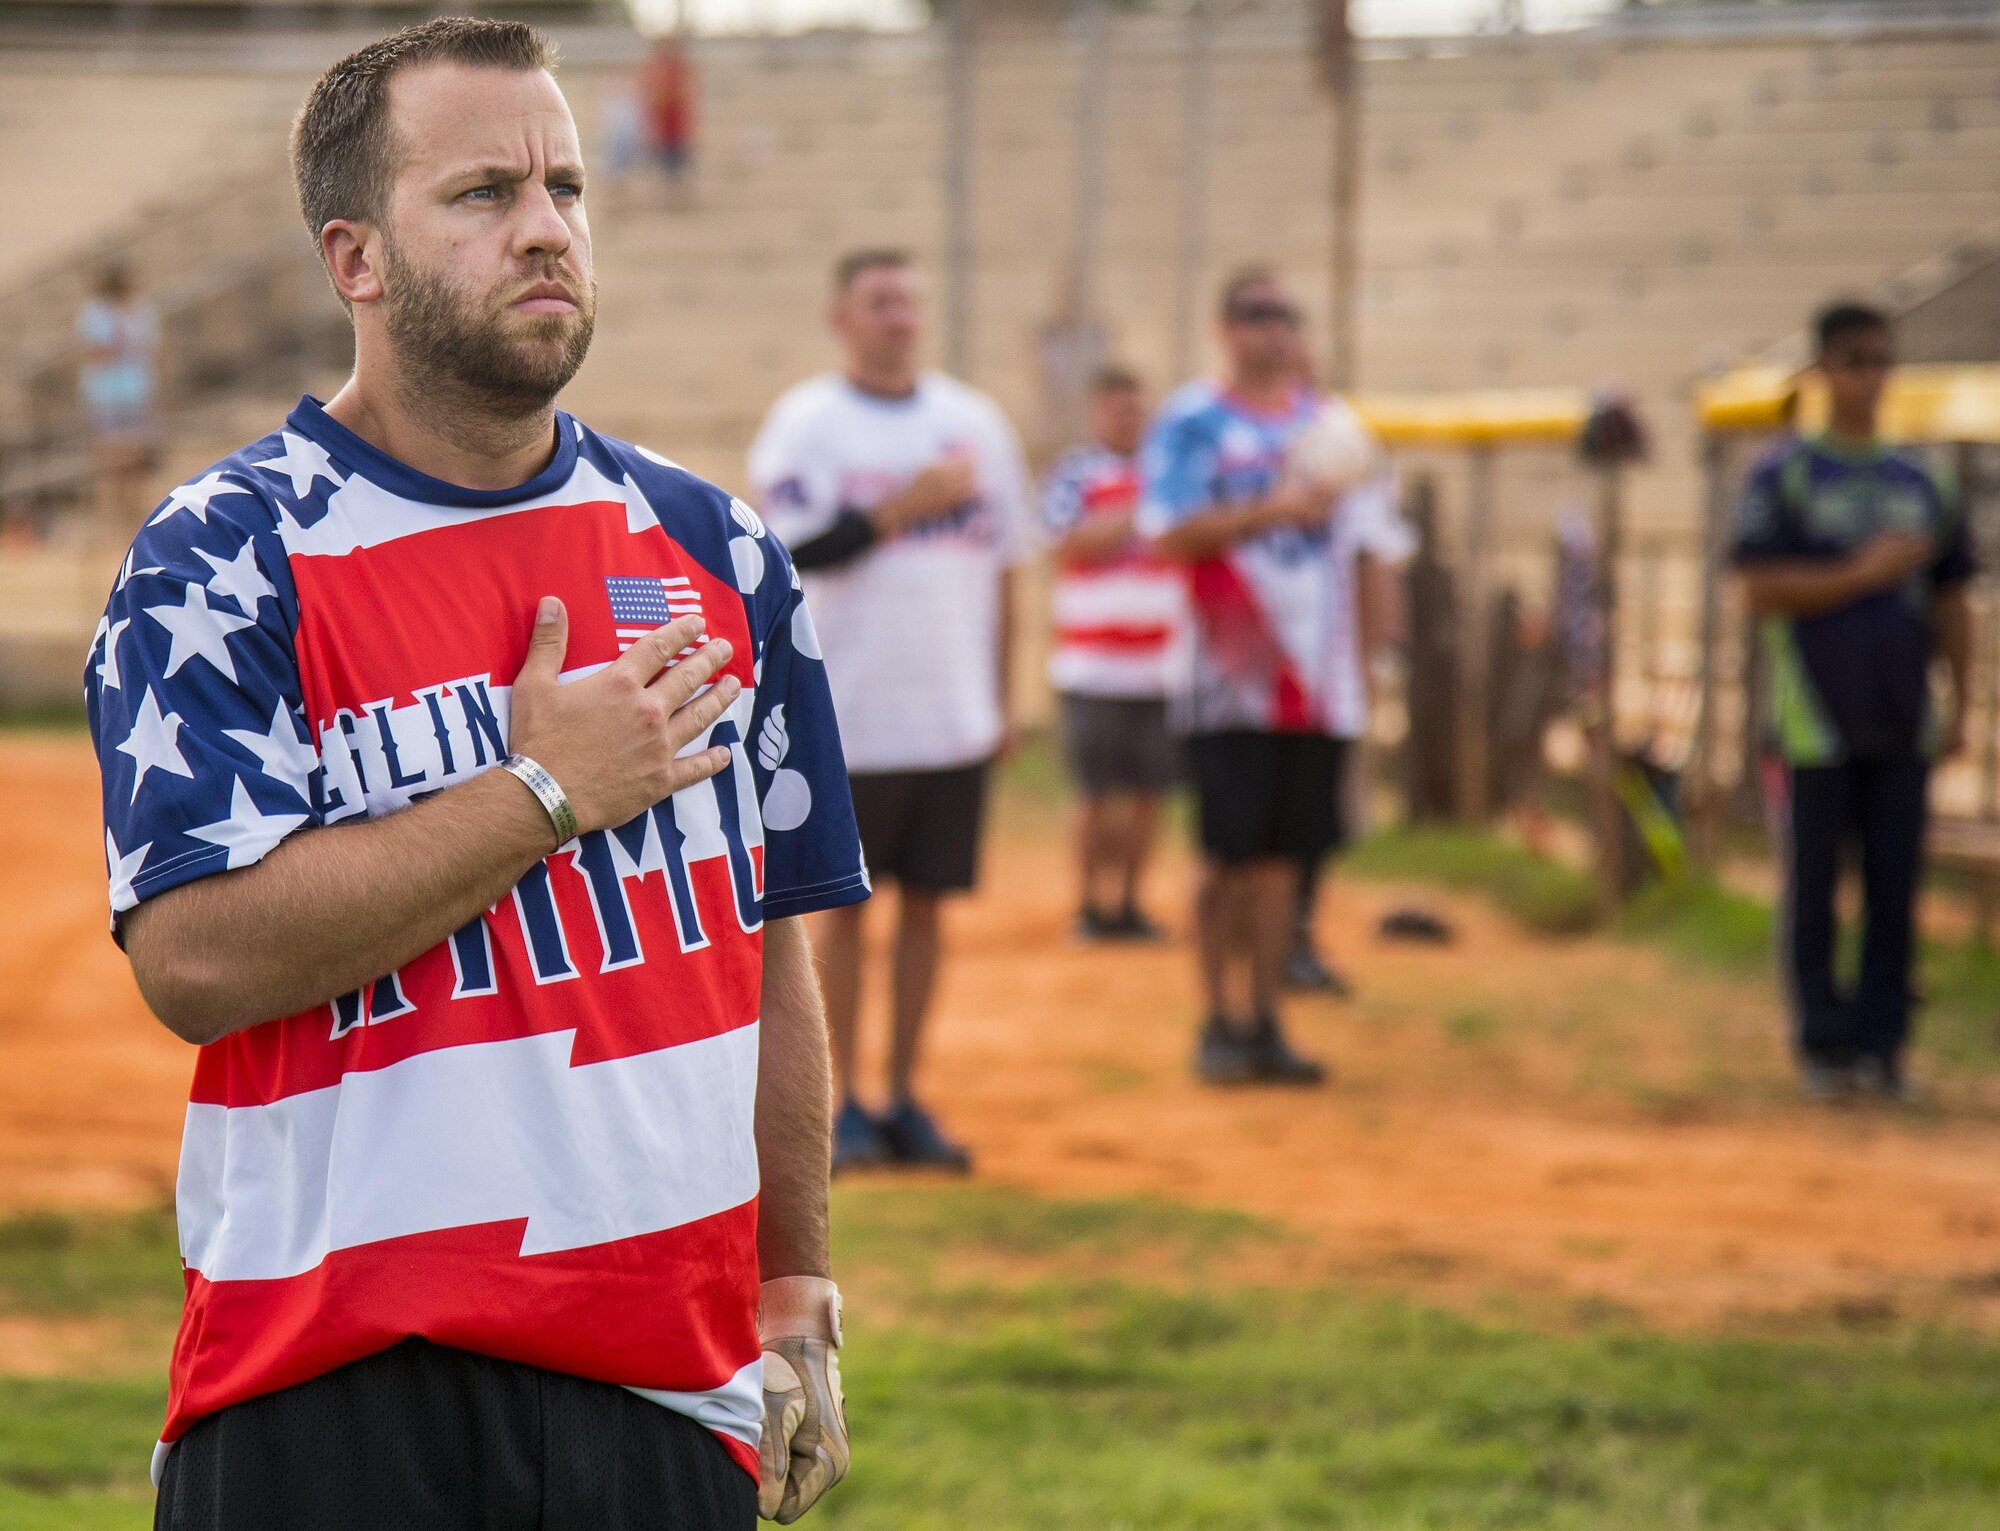 Kris Hampton, 96th Maintenance Squadron, stands with his hand over his heart during the National Anthem prior to his team’s intramural softball game against the 359th Training Squadron team July 17 at Eglin Air Force Base, Fla.  The league-leading Maintainers pounded the training squadron 10-5 to improve to 9-1 on the season.  (U.S. Air Force photo/Samuel King Jr.)